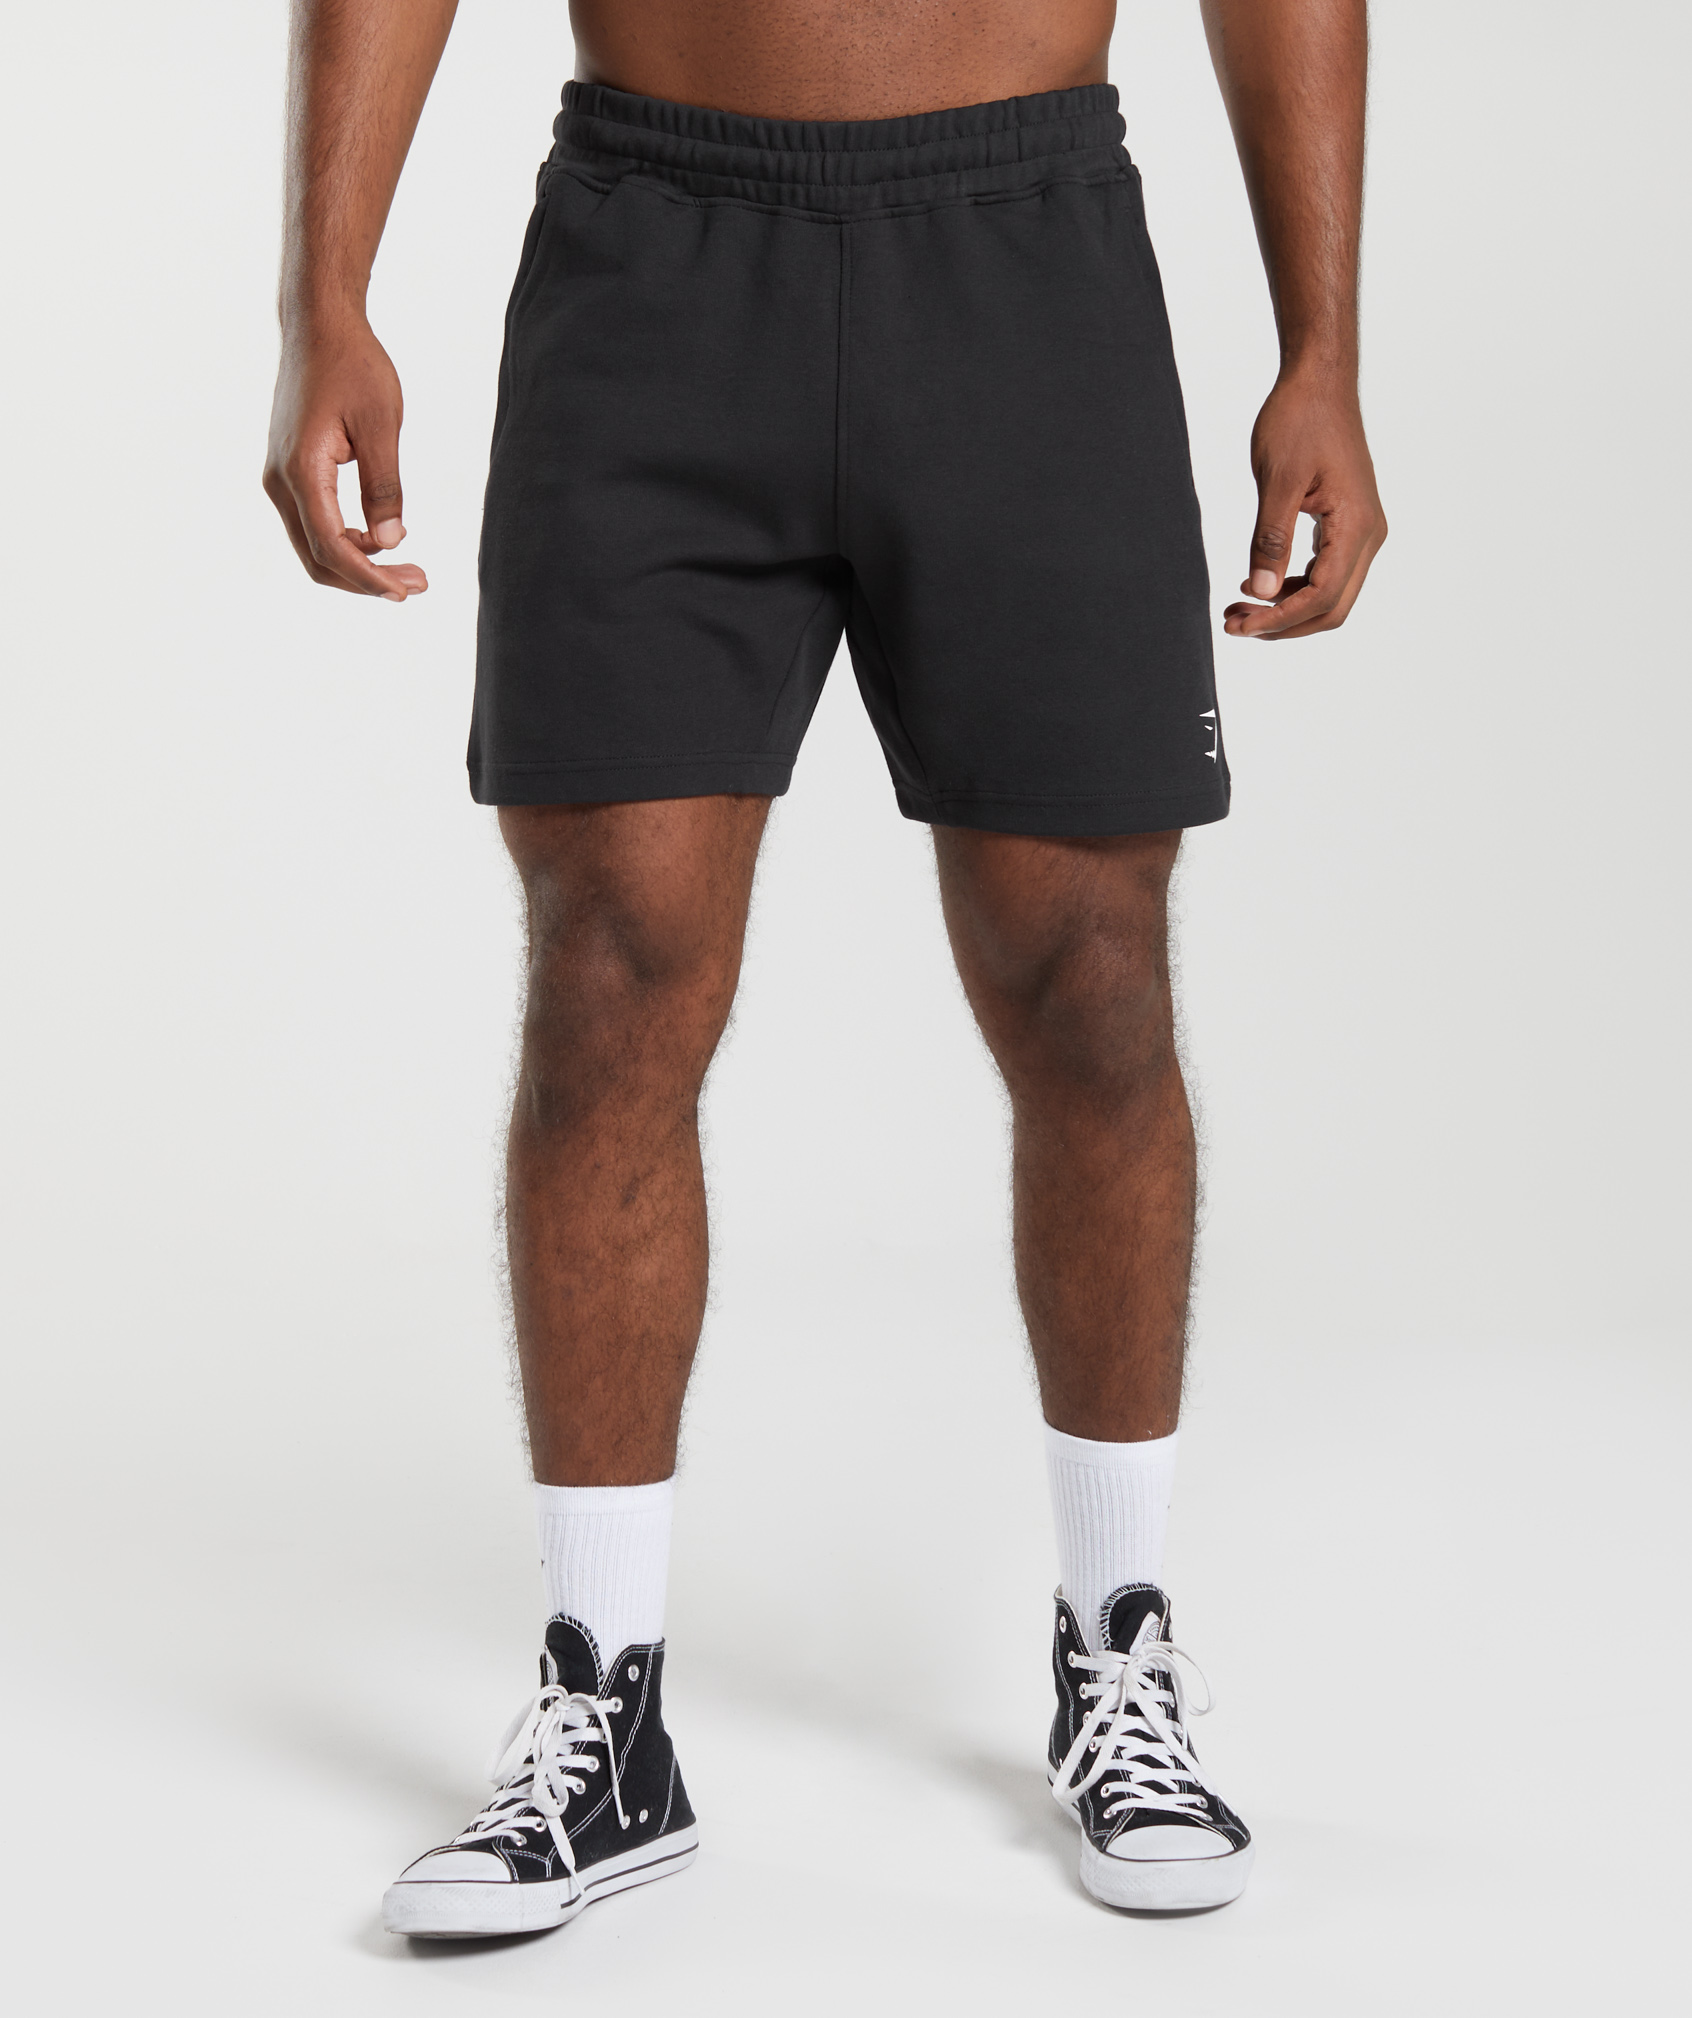 6 Of The Best Sweat Shorts For Men To Live In Every Weekend